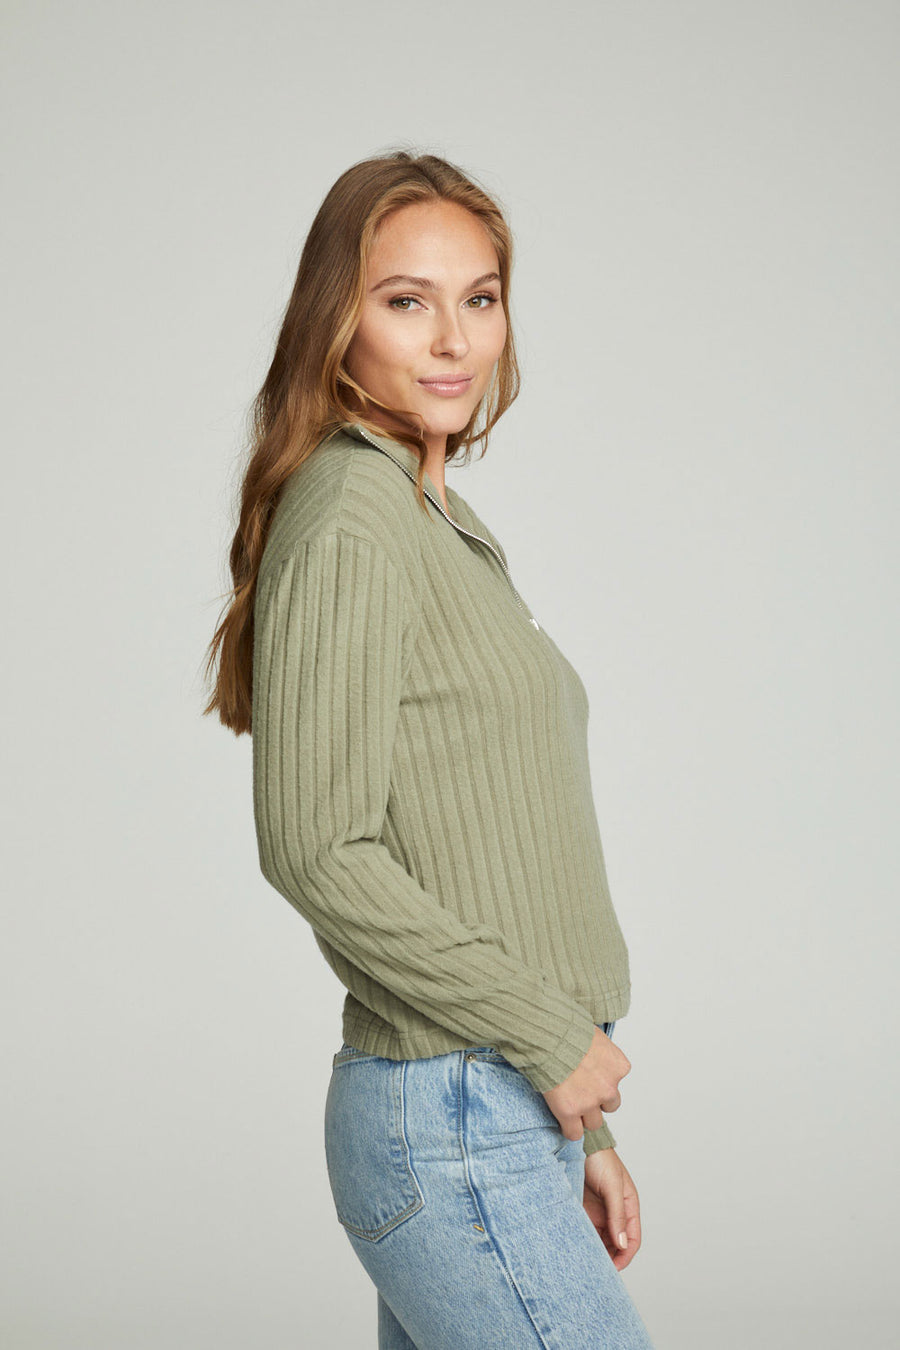 Zip Up Mock Neck Long Sleeve Pullover WOMENS chaserbrand